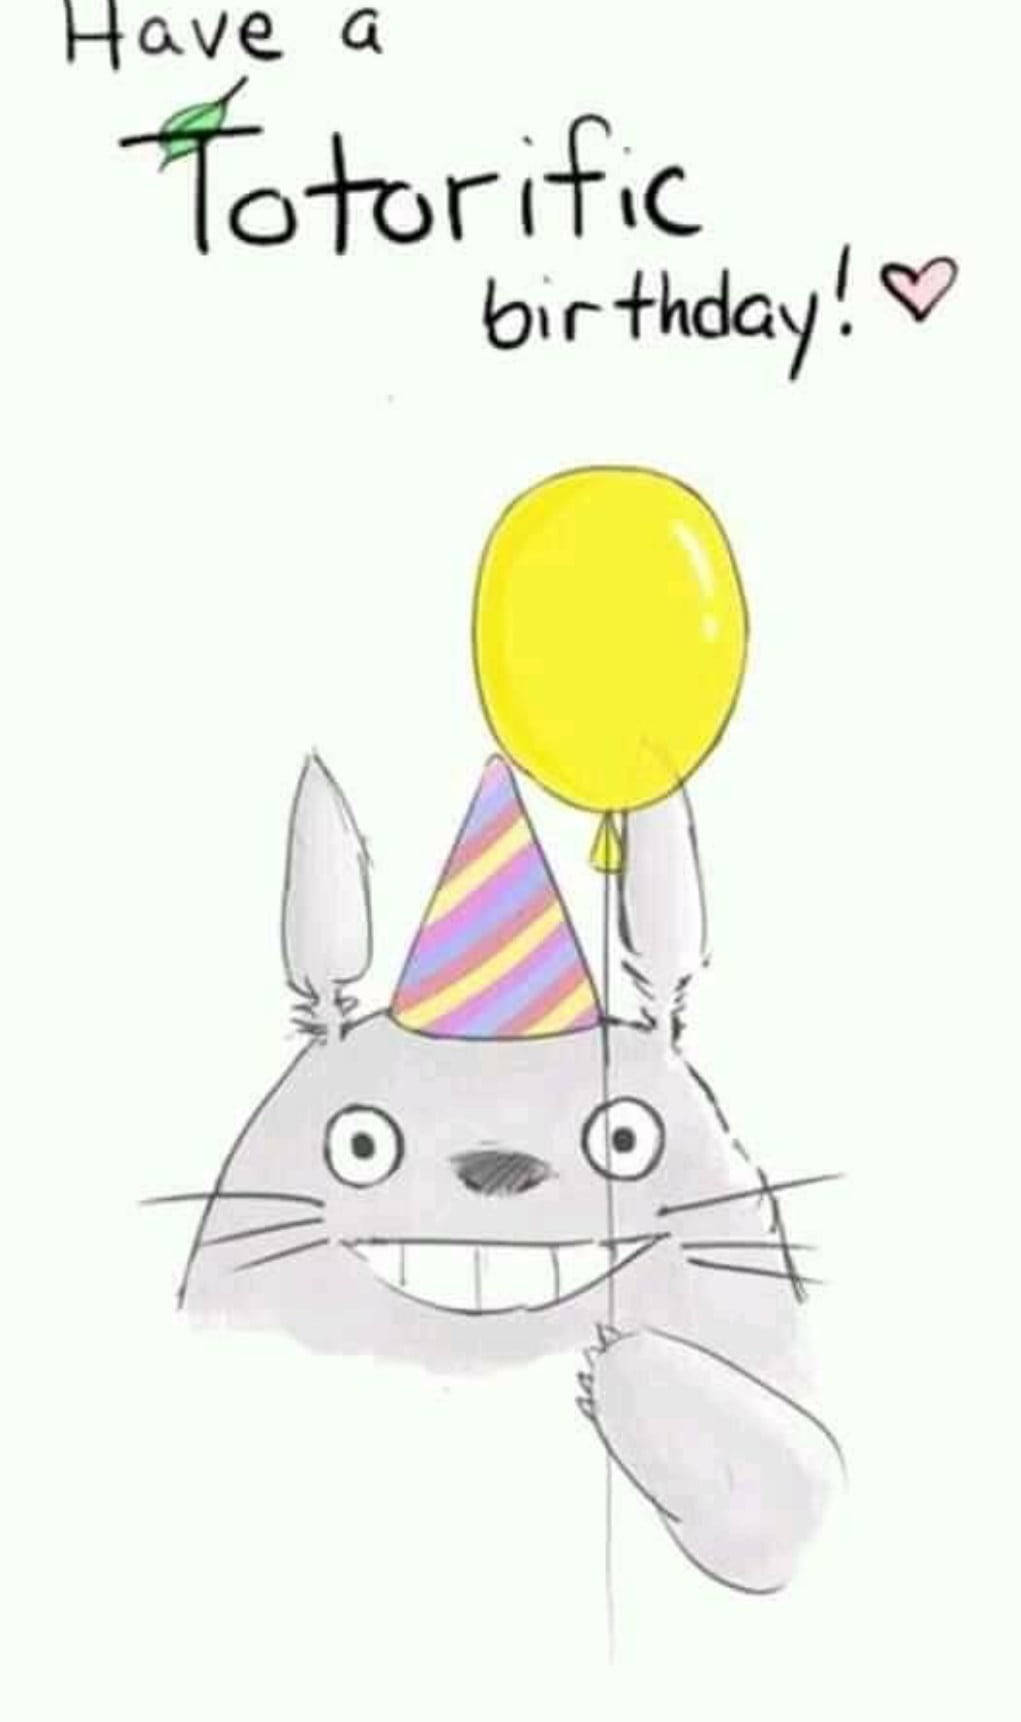 Totoro Greeting Me For My Birthday